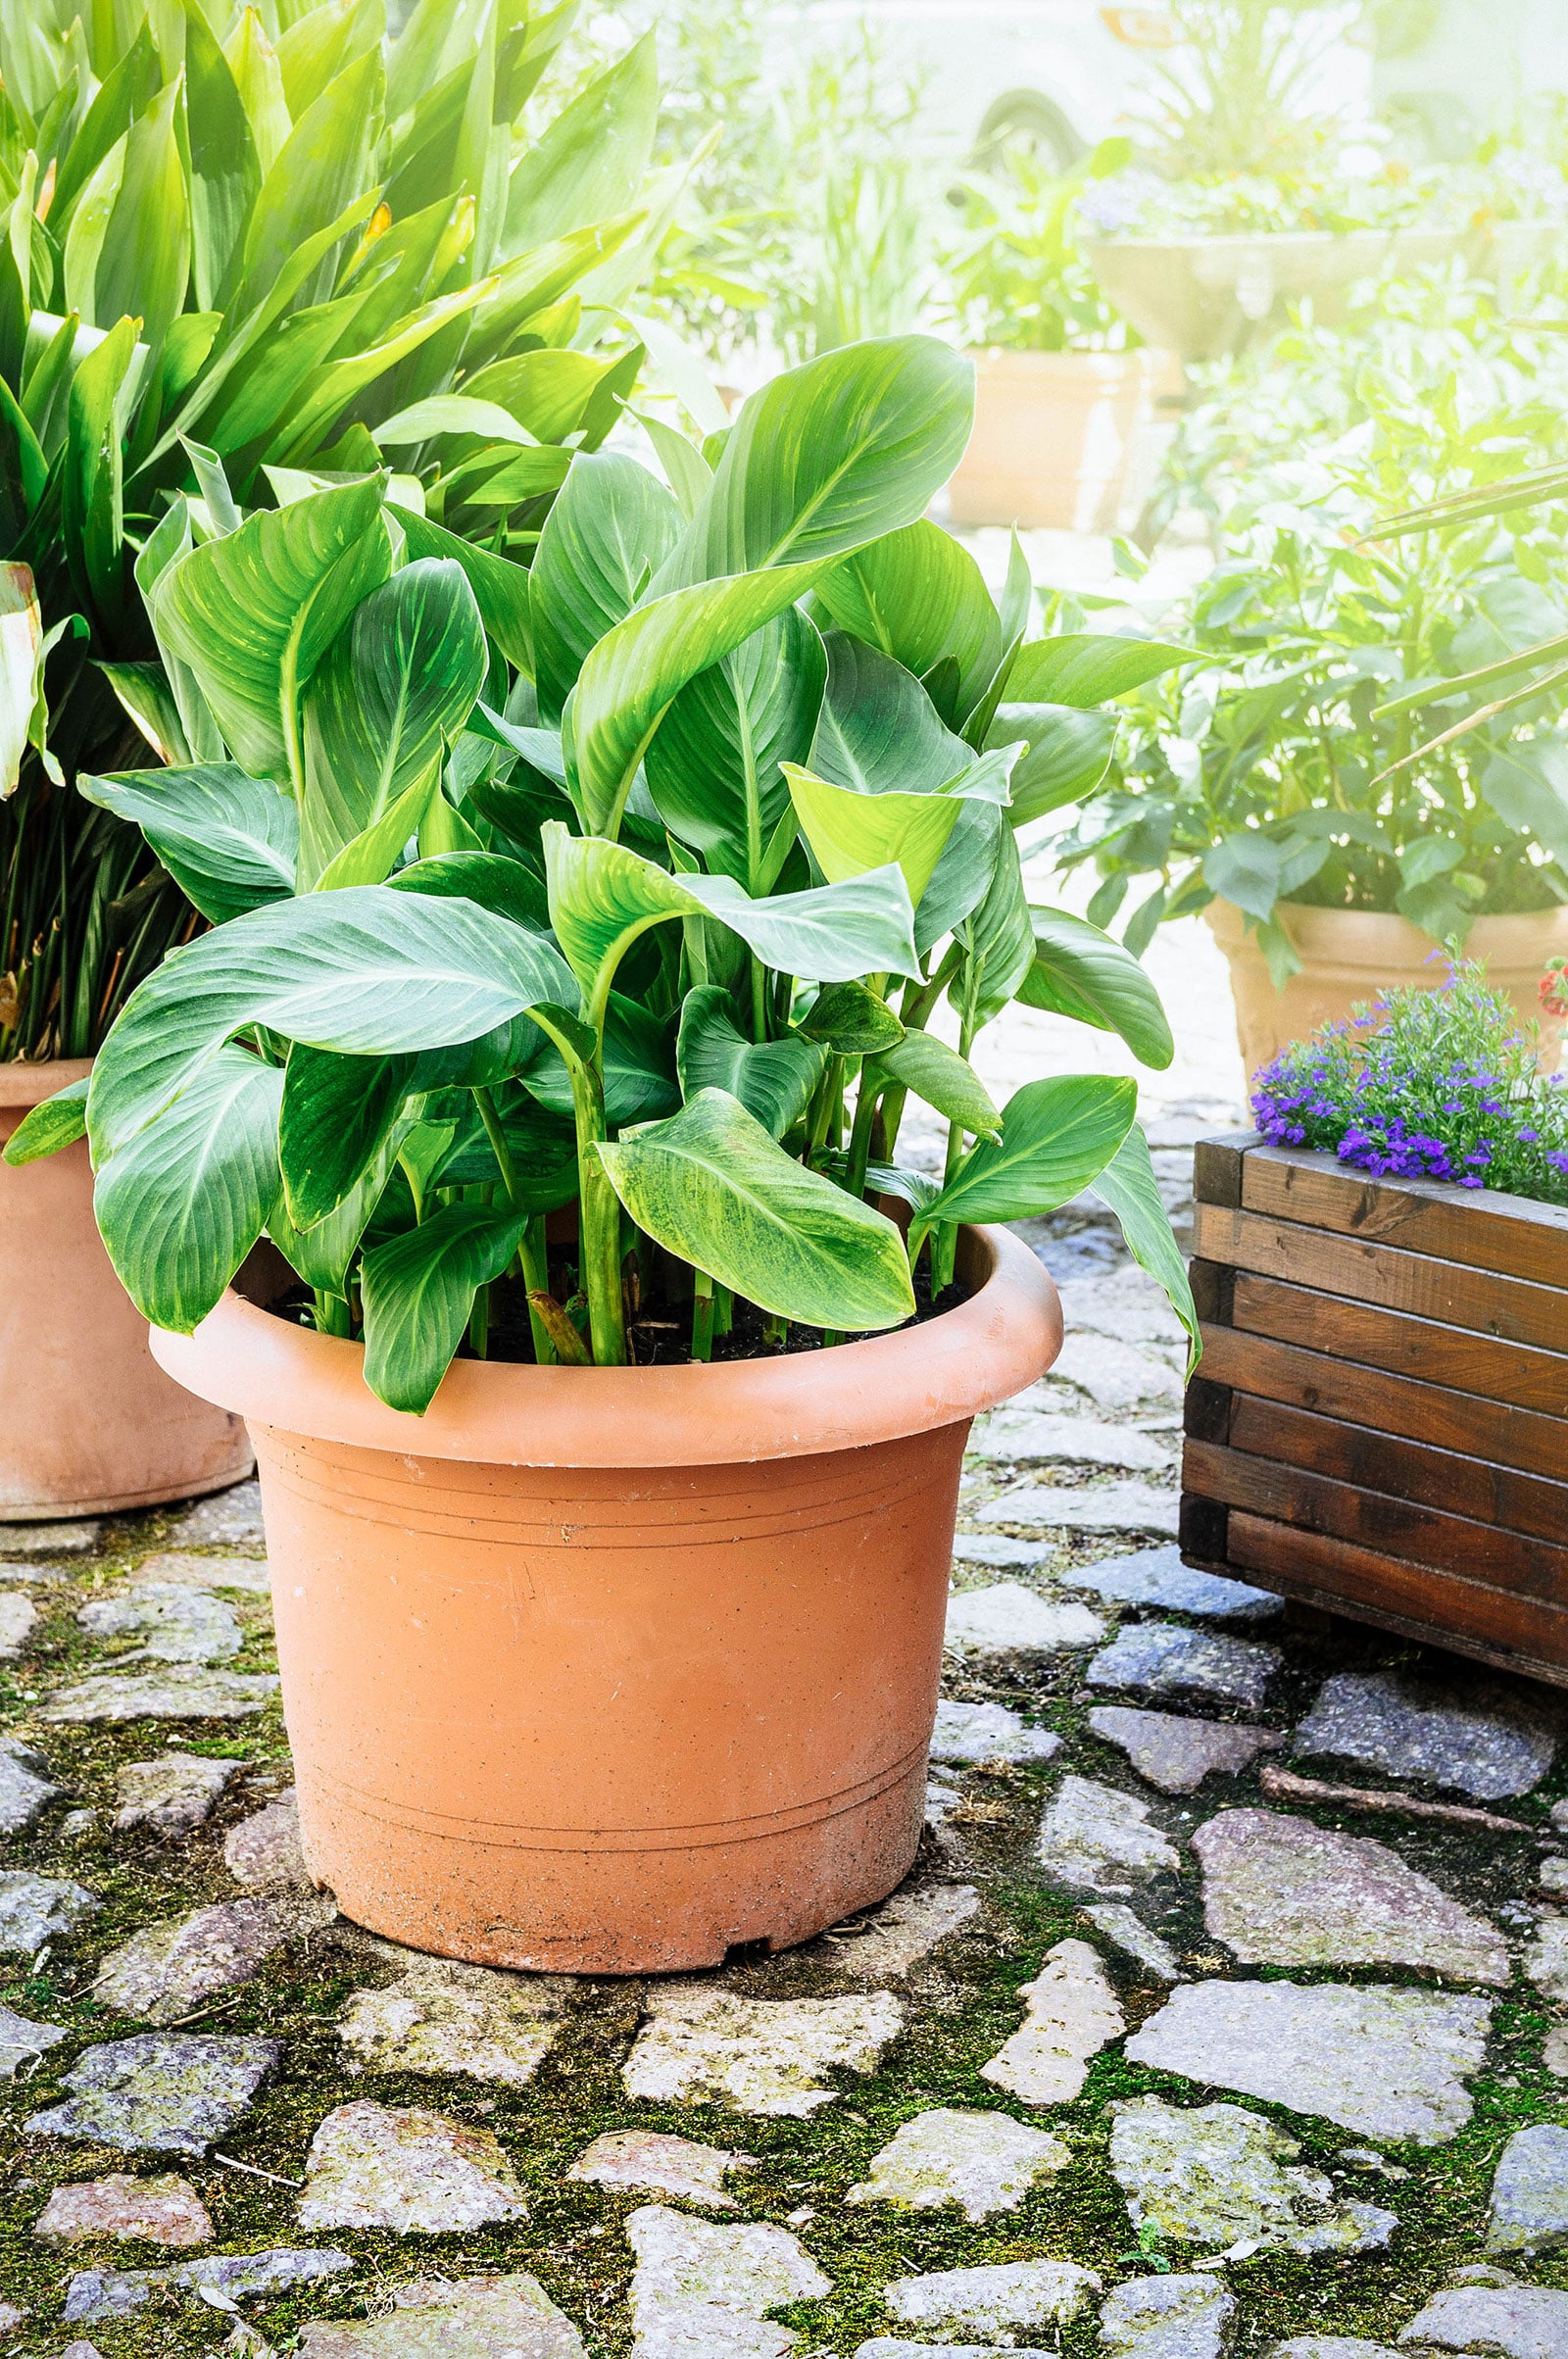 A small banana plant growing outdoors on a patio in a brown pot